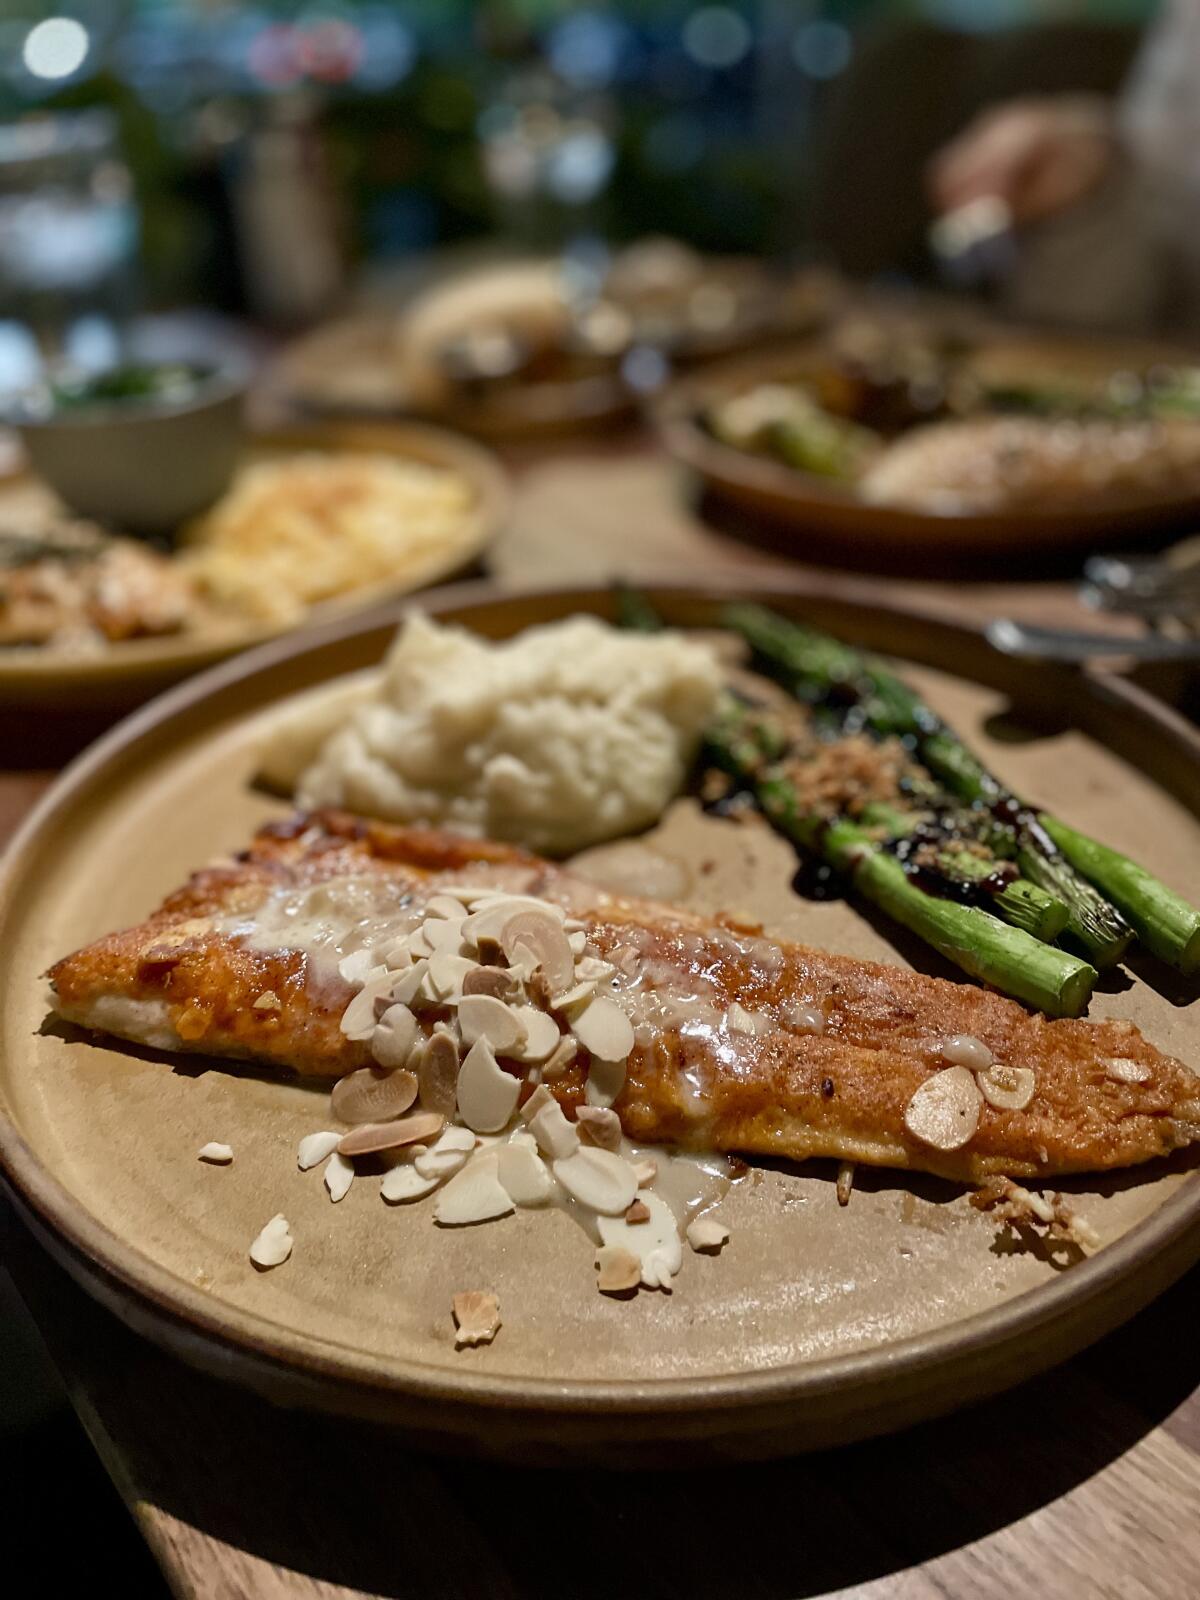 The Trout Amandine is one of the most reasonably priced entrées at King’s Fish House.